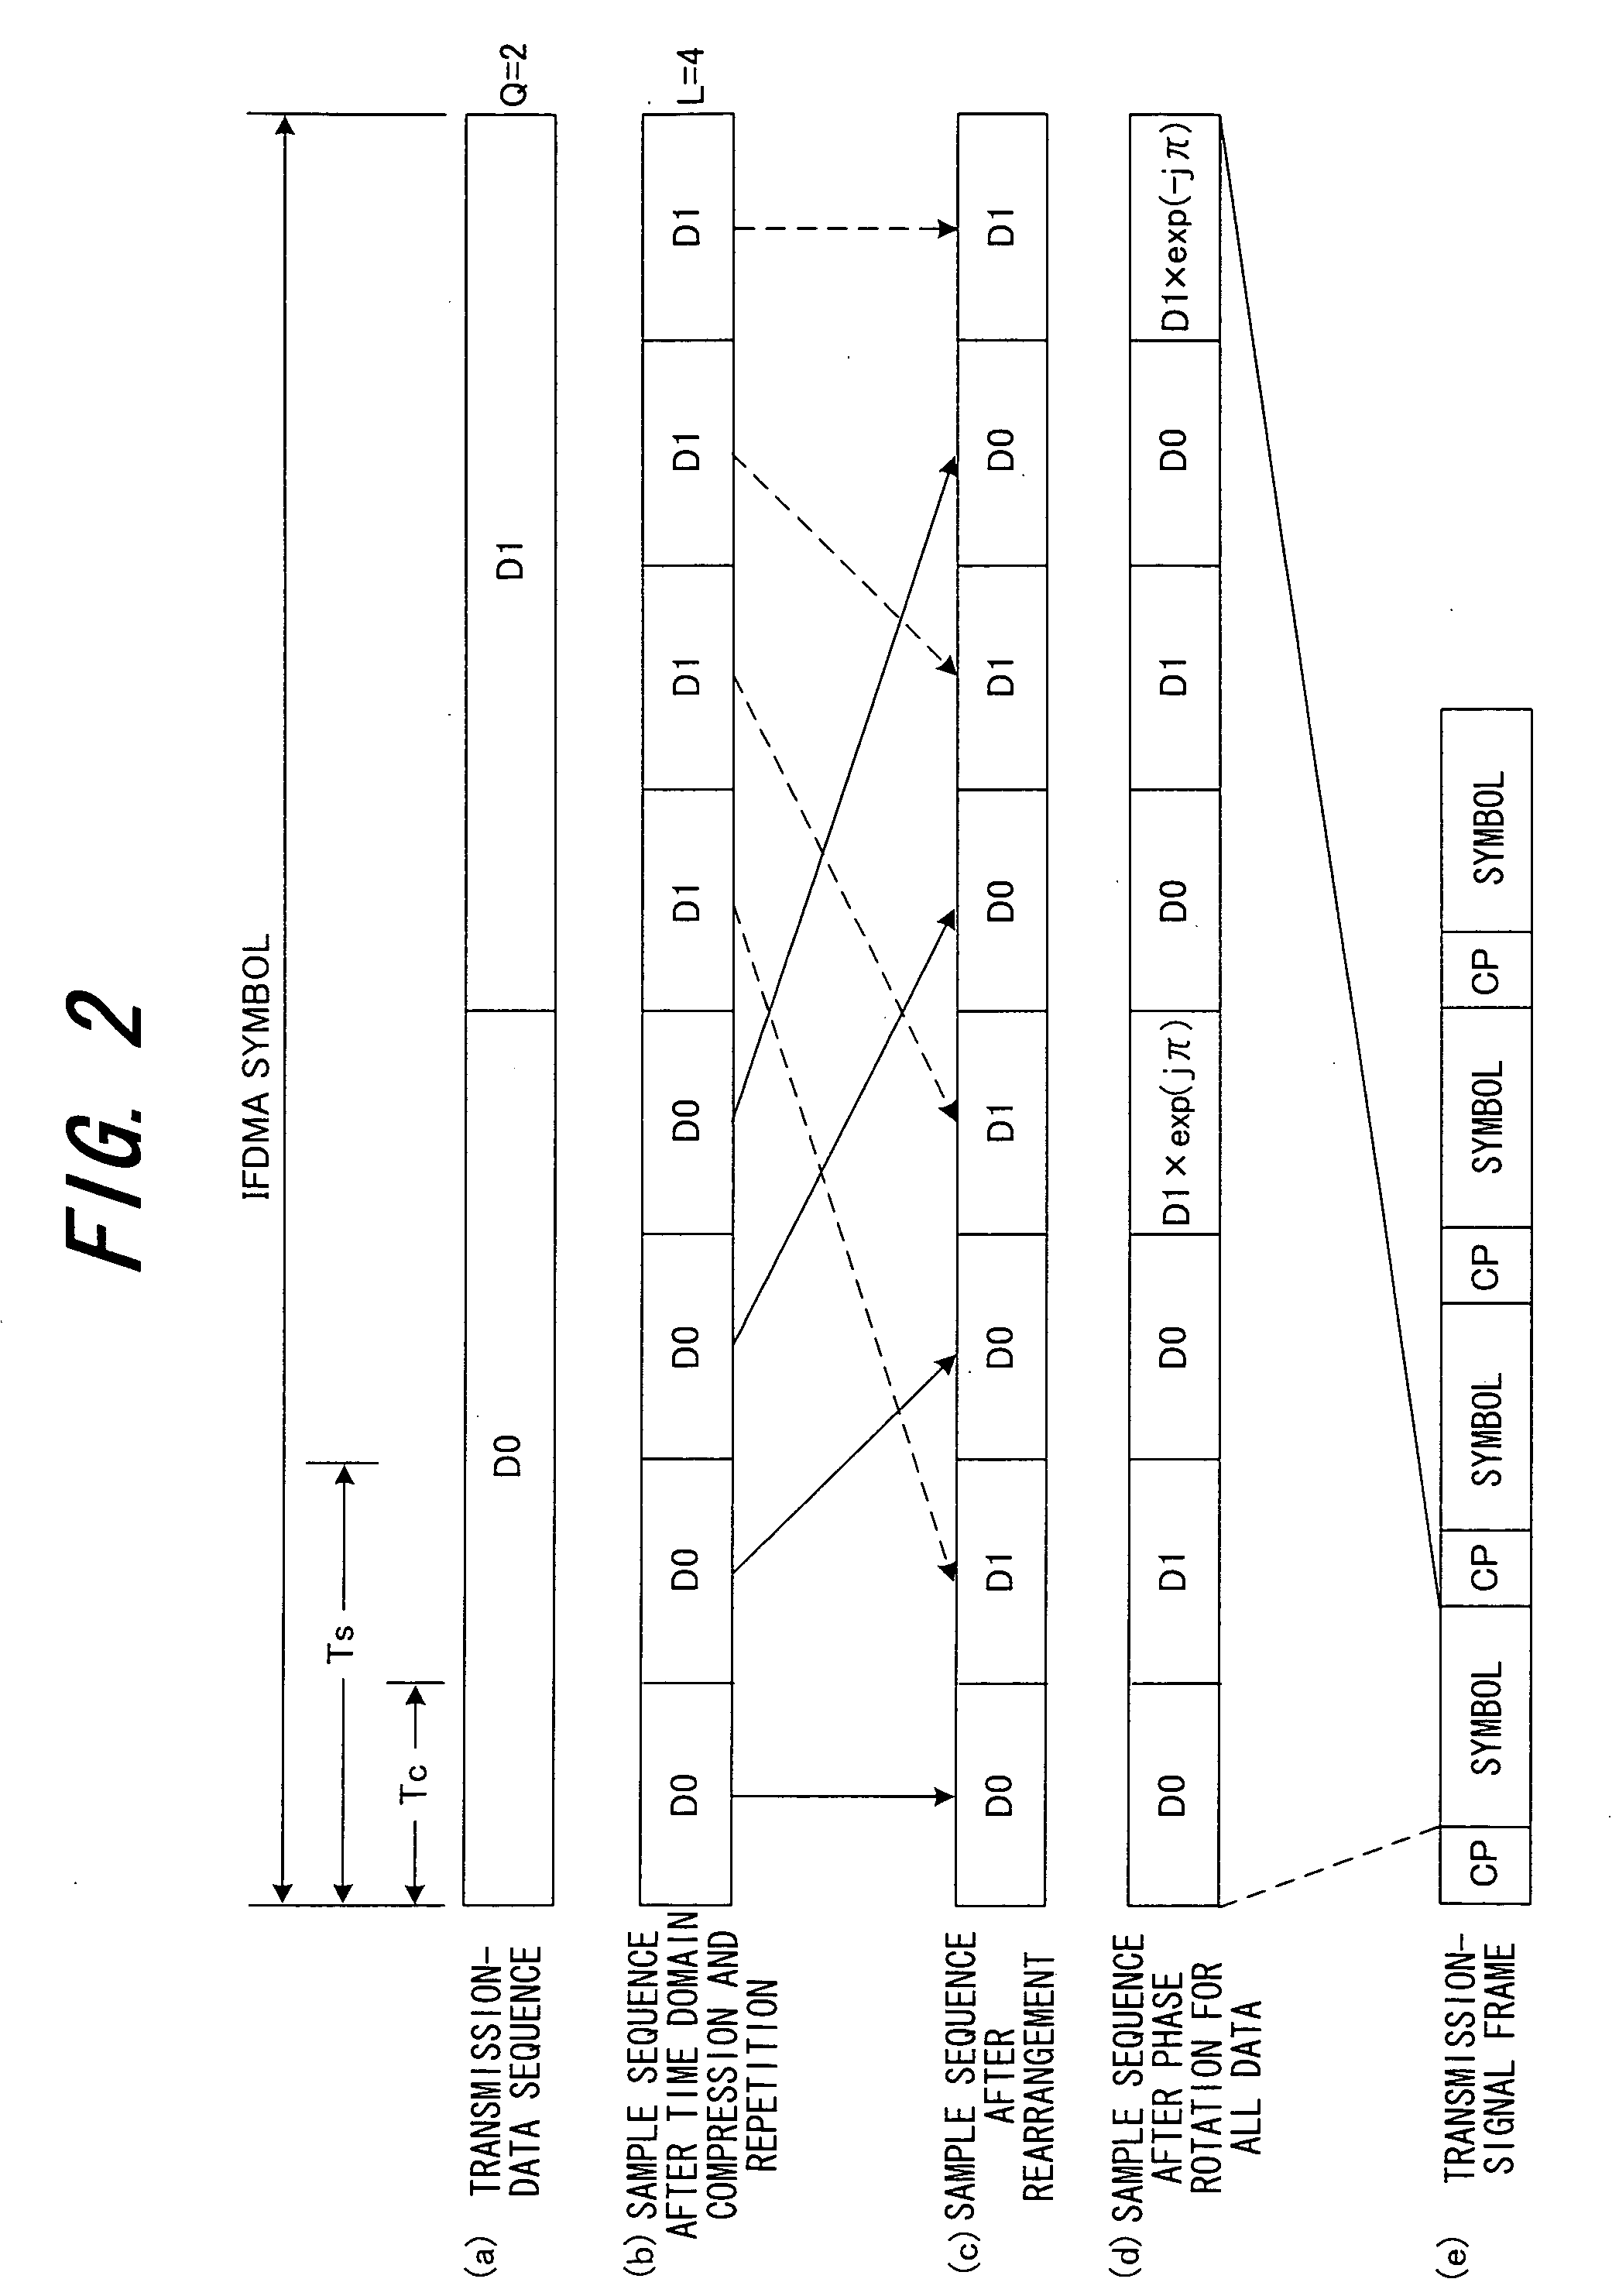 Frequency-division multiplexing transceiver apparatus, wave-number-division multiplexing transceiver apparatus and method